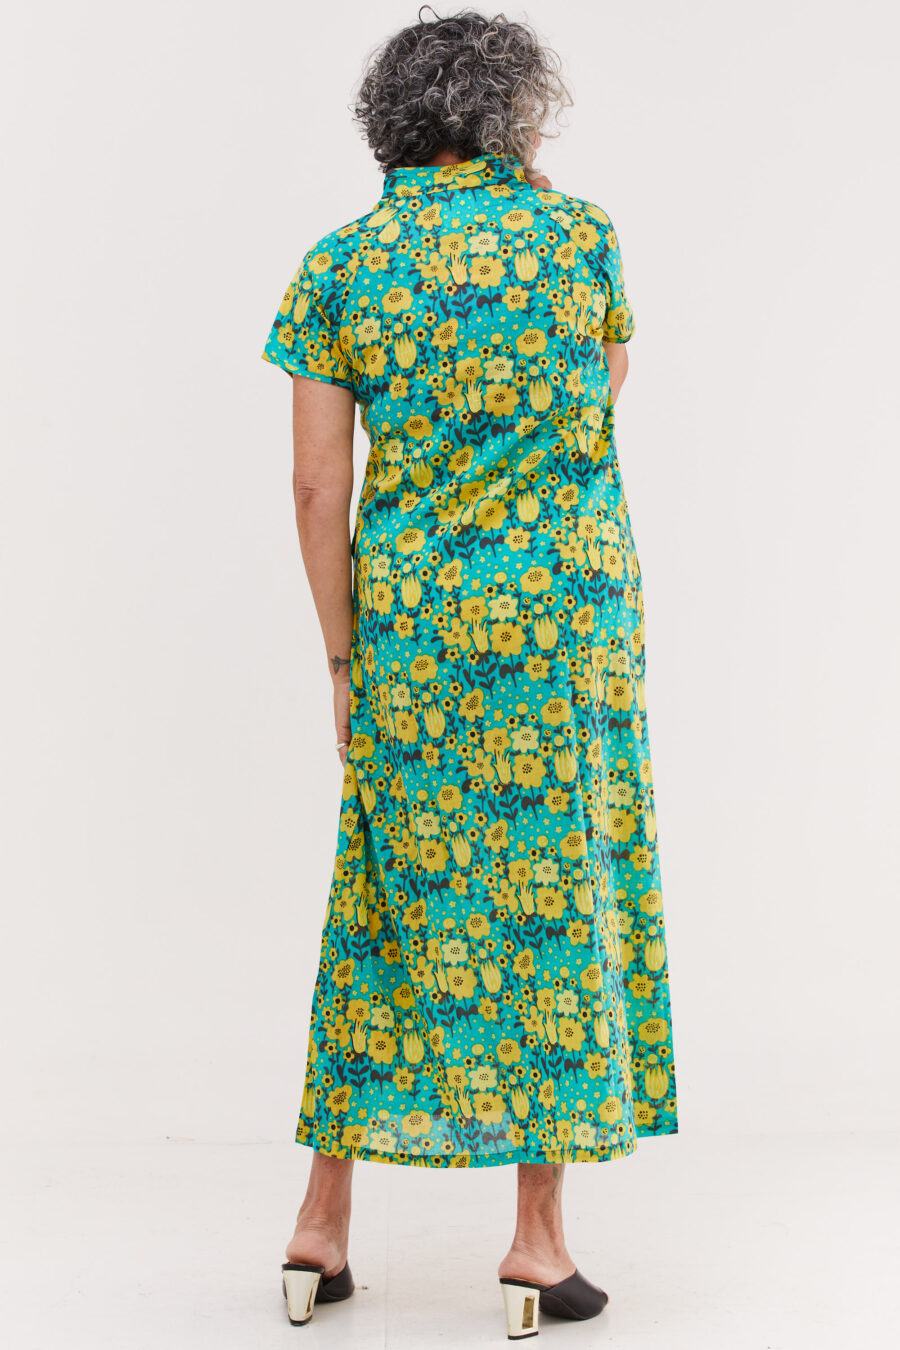 Maiko dress | Japanese dress with a unique high collar – Optimism print, tourquise dress with yellow flowers print by comfort zone boutique